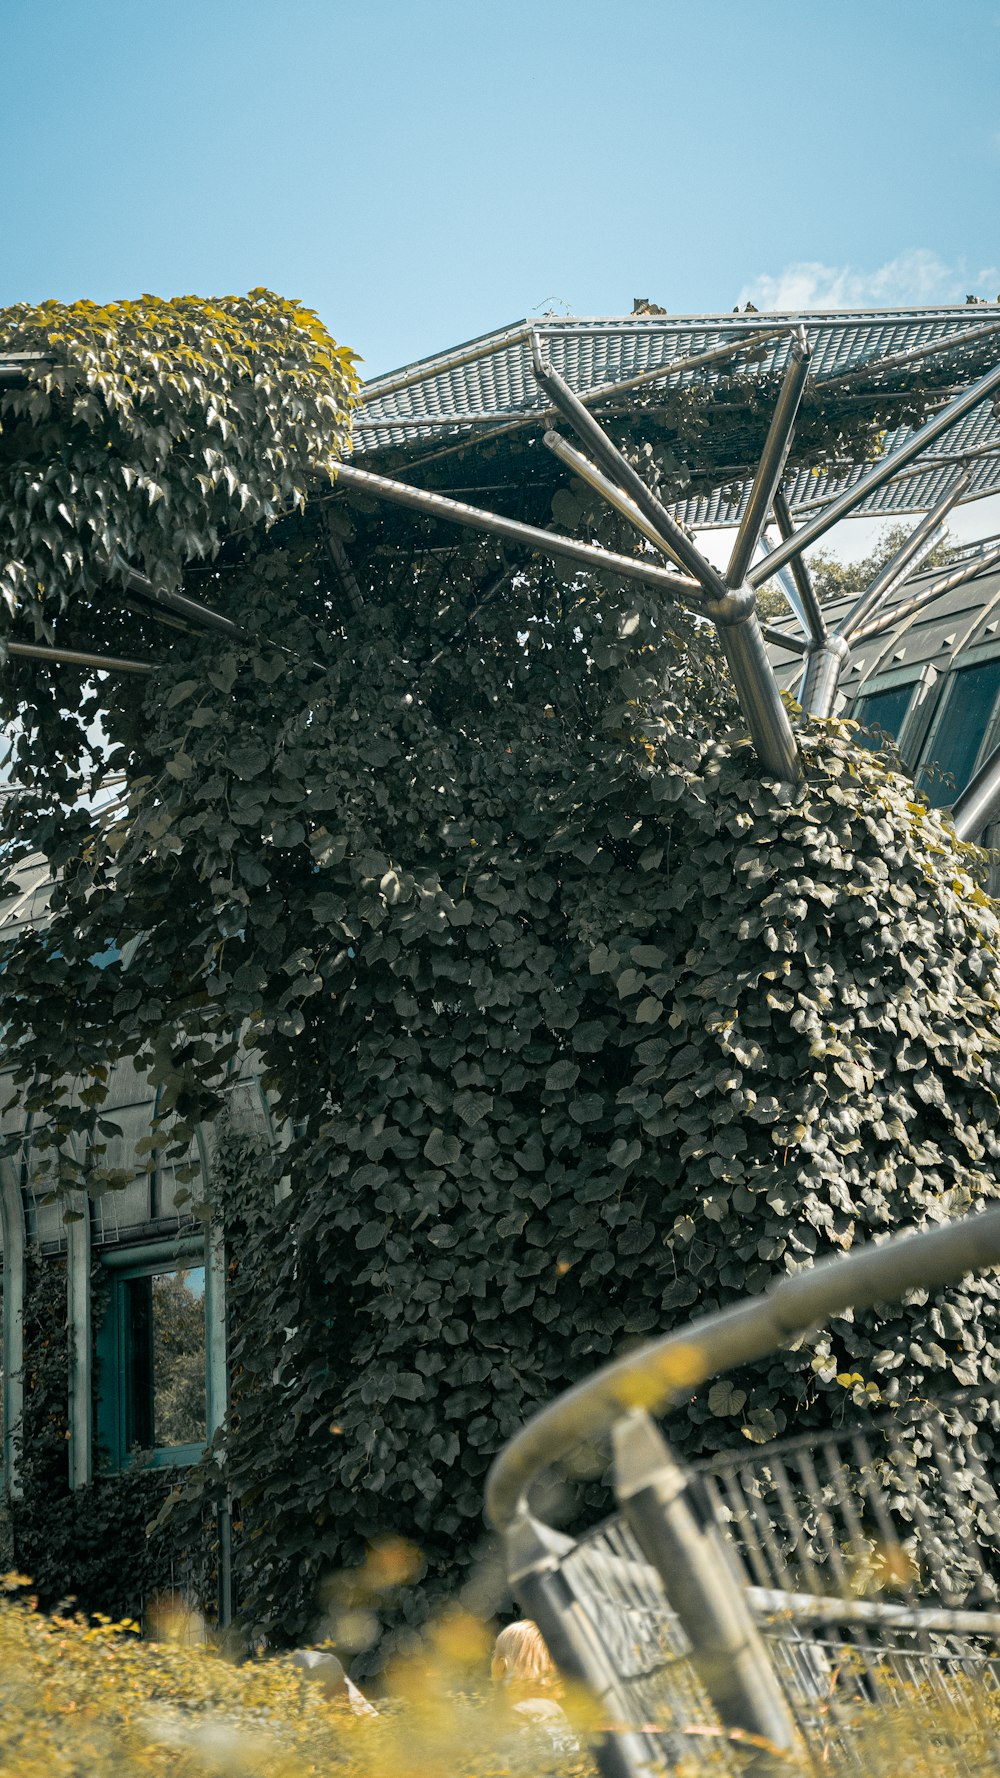 a building made out of rocks and vines